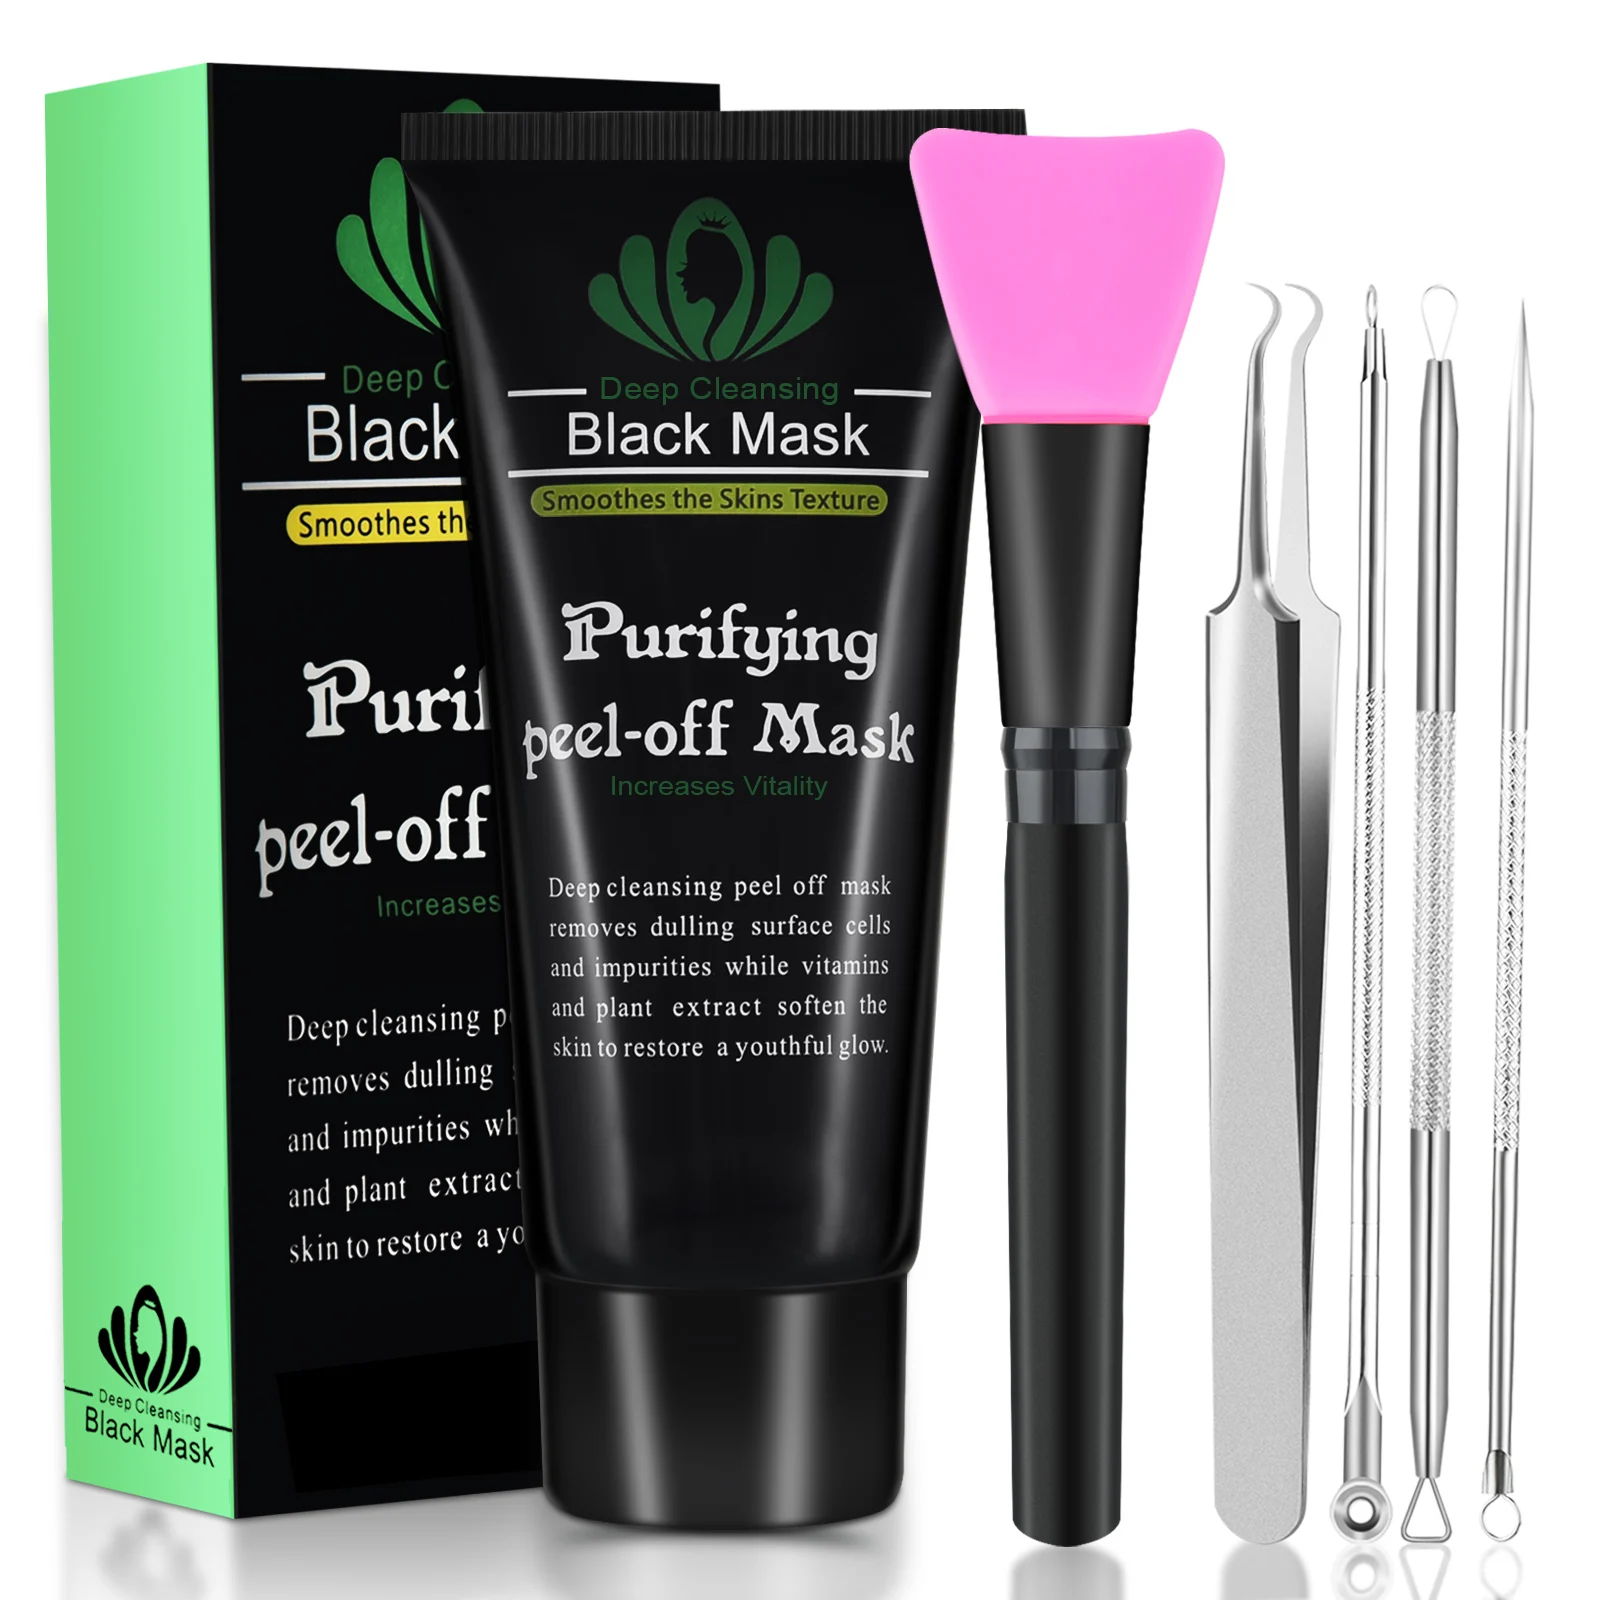 

Black Mask Bamboo Charcoal Blackhead Removal Acne Treatment Face Mask Deep Cleansing Pore Purifying Peel-off Masks for Face Nose